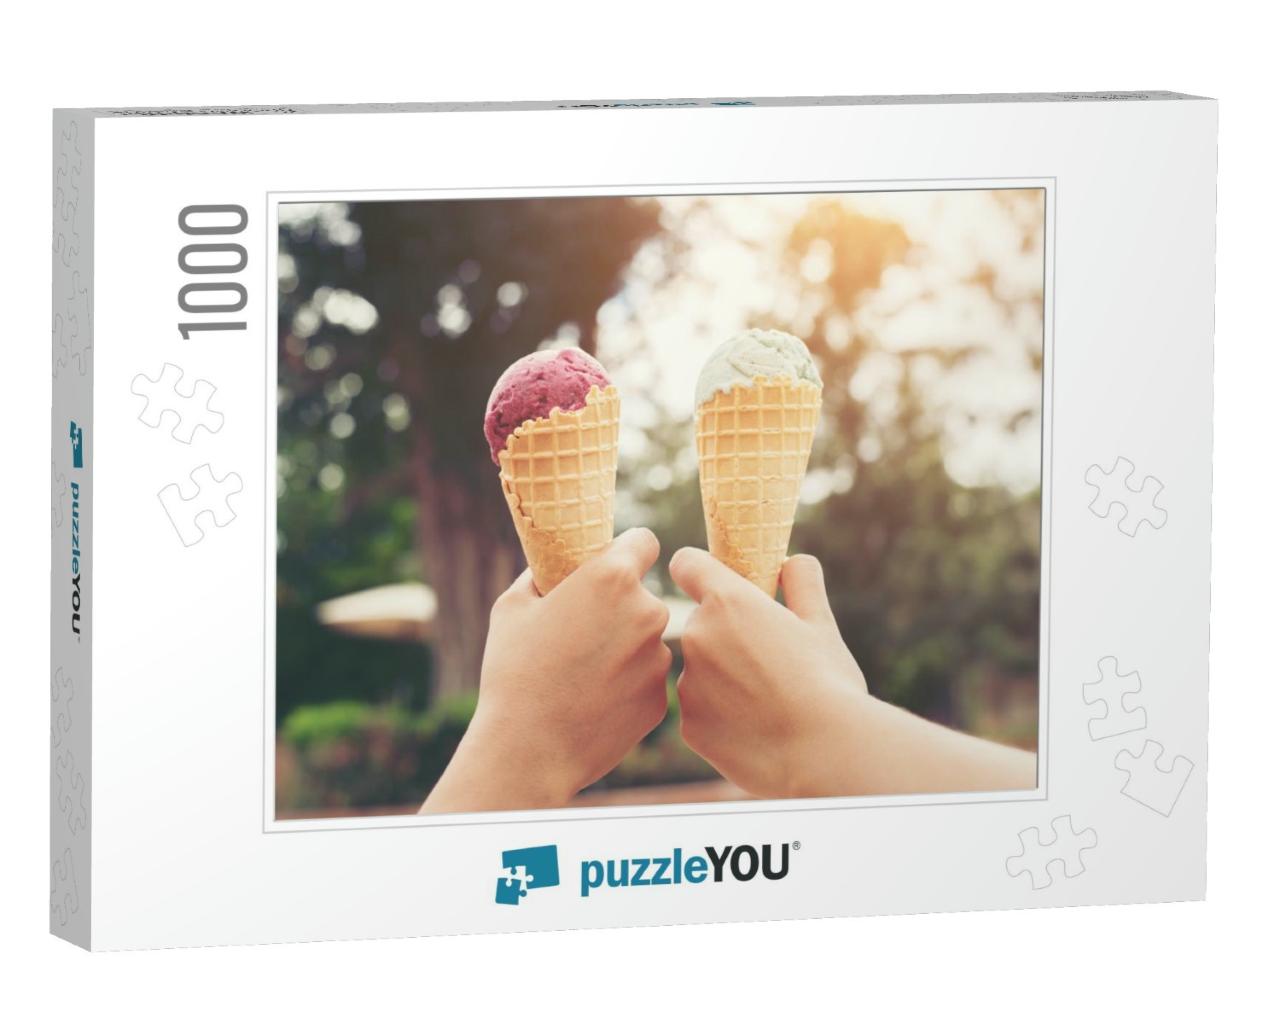 Woman's Hands Holding Melting Ice Cream Waffle Cone in Ha... Jigsaw Puzzle with 1000 pieces